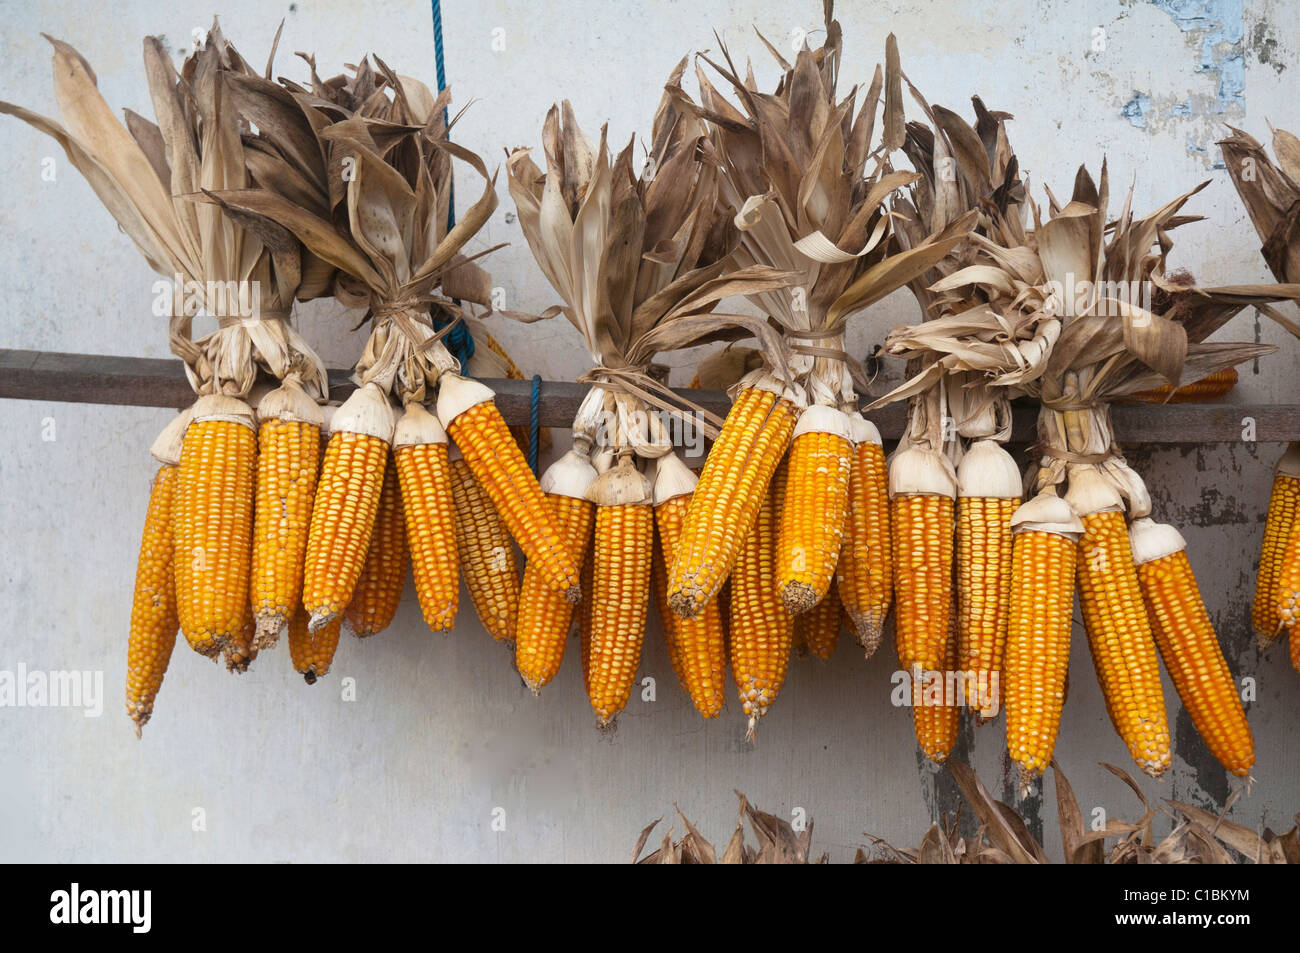 Sweet corn drying on the side of a house in Bali Indonesia Stock Photo